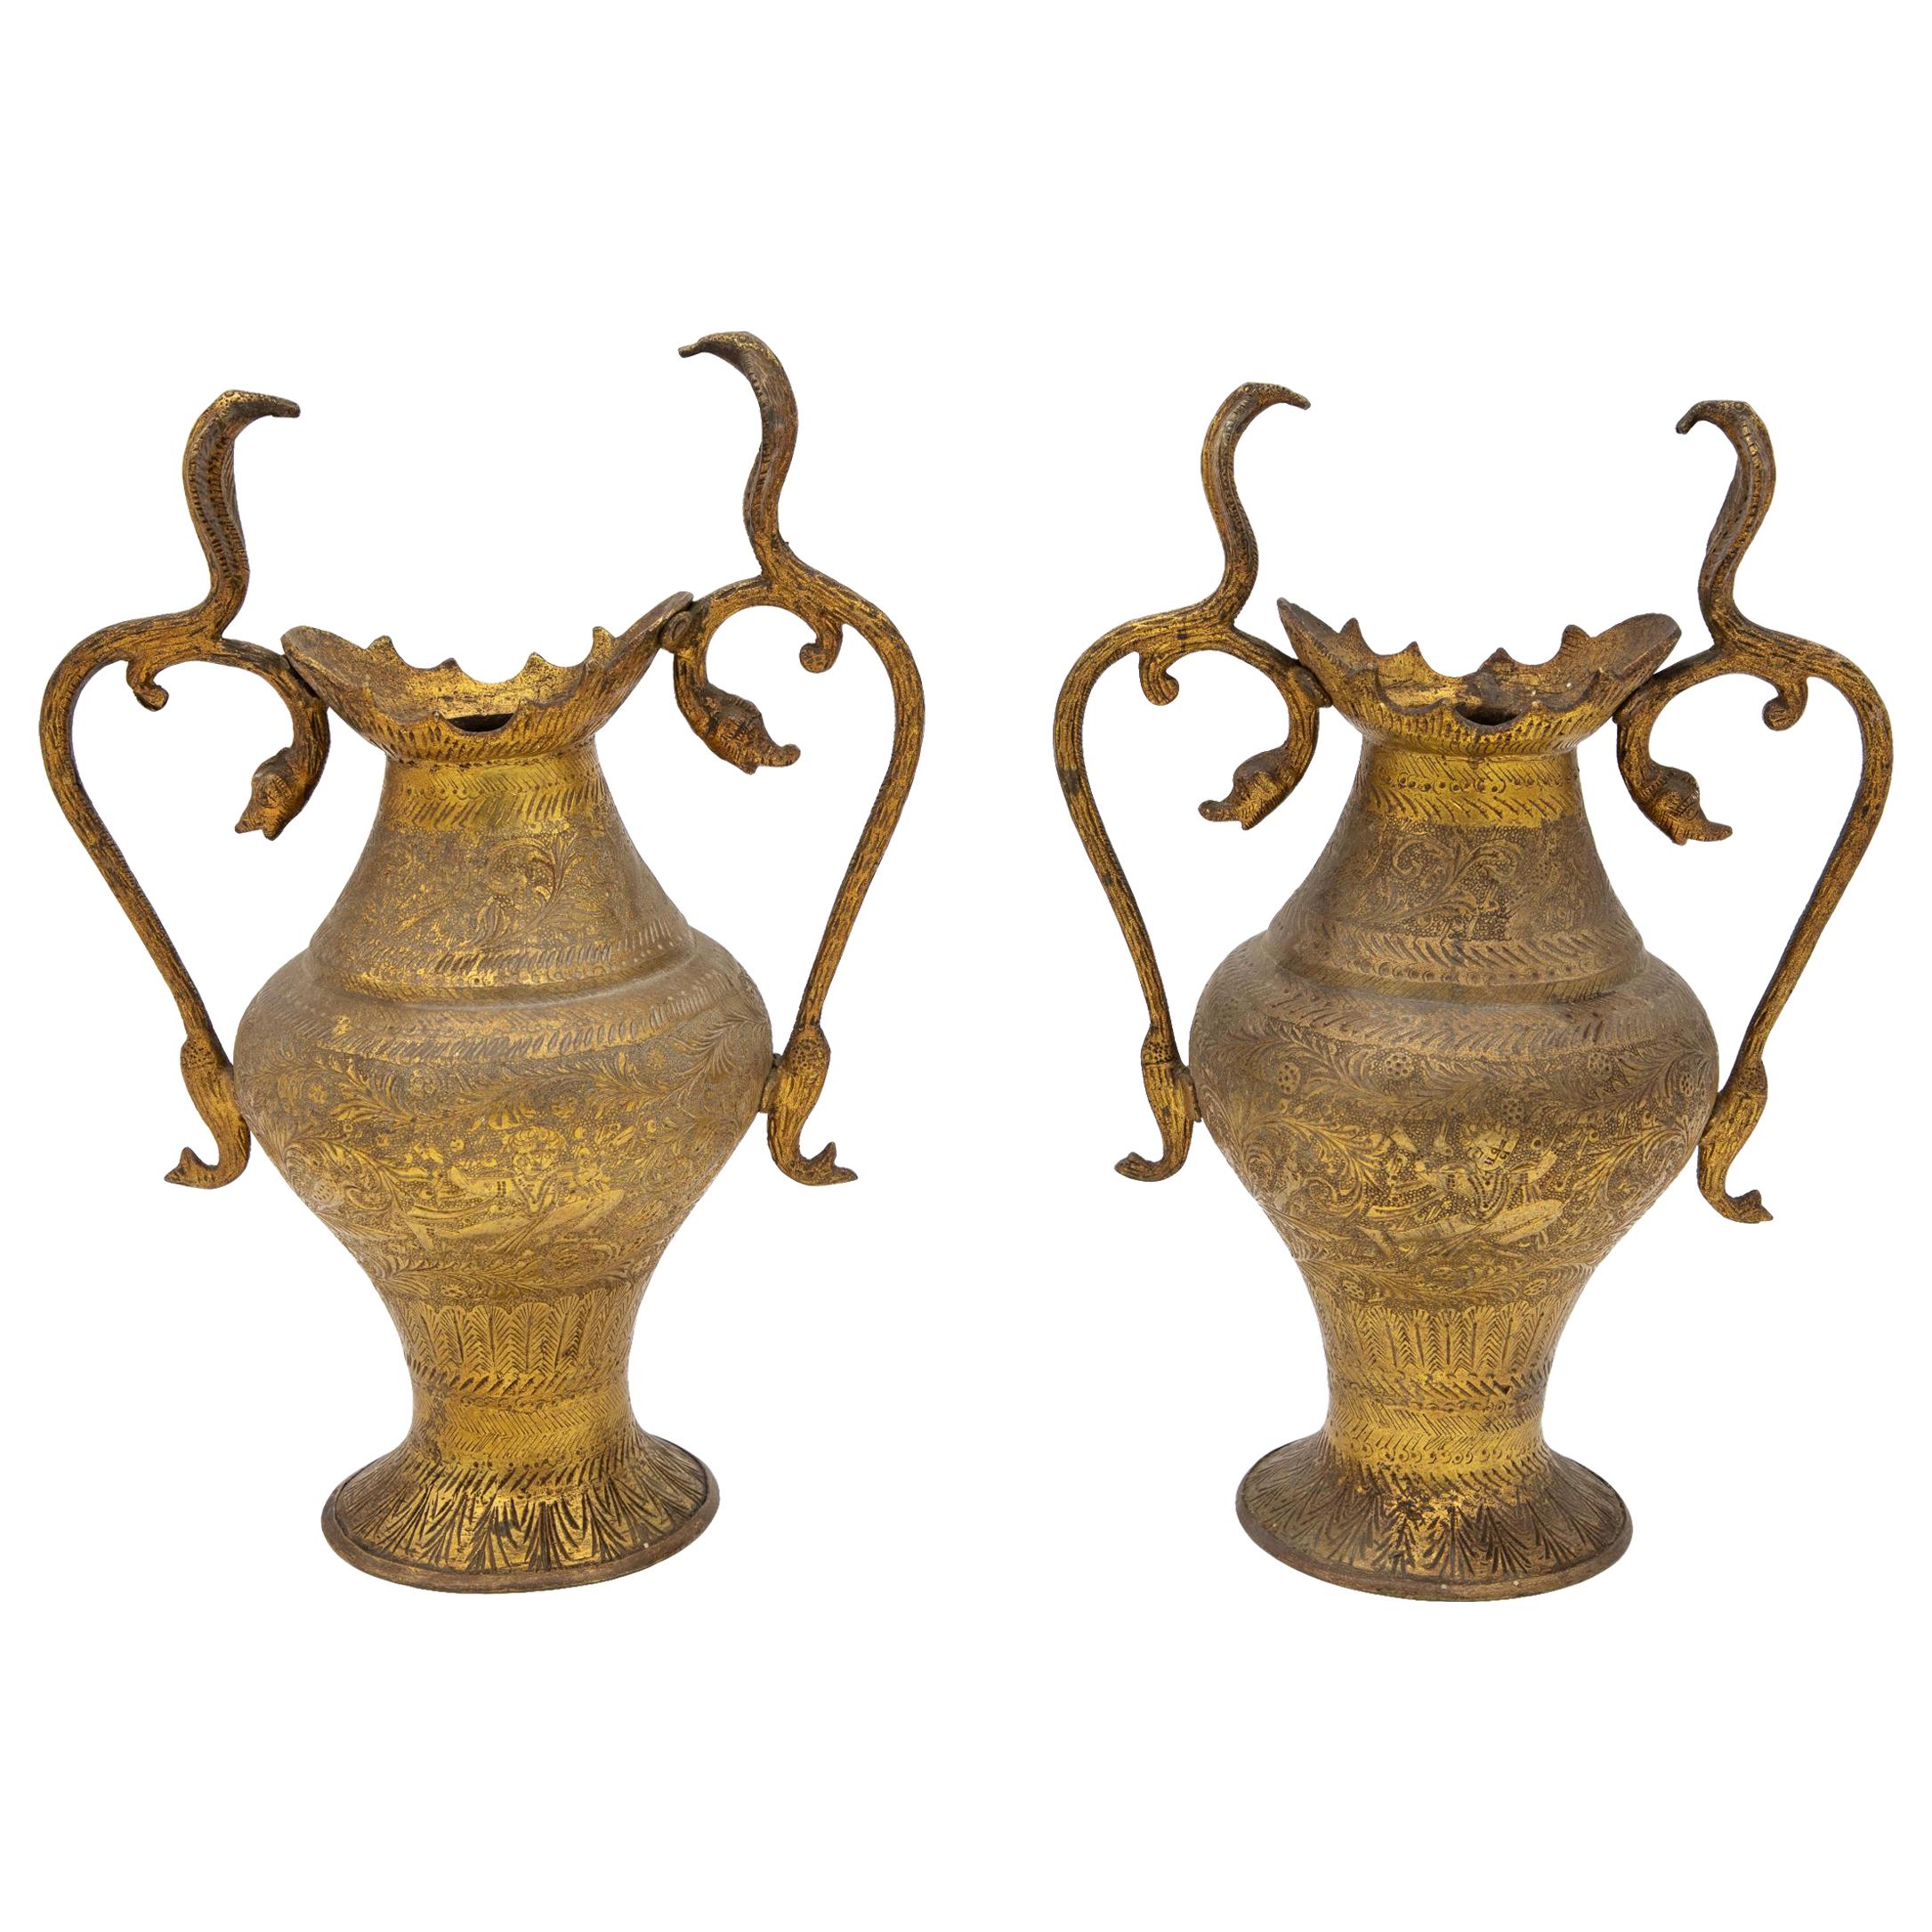 Pair of Small Snake Vases